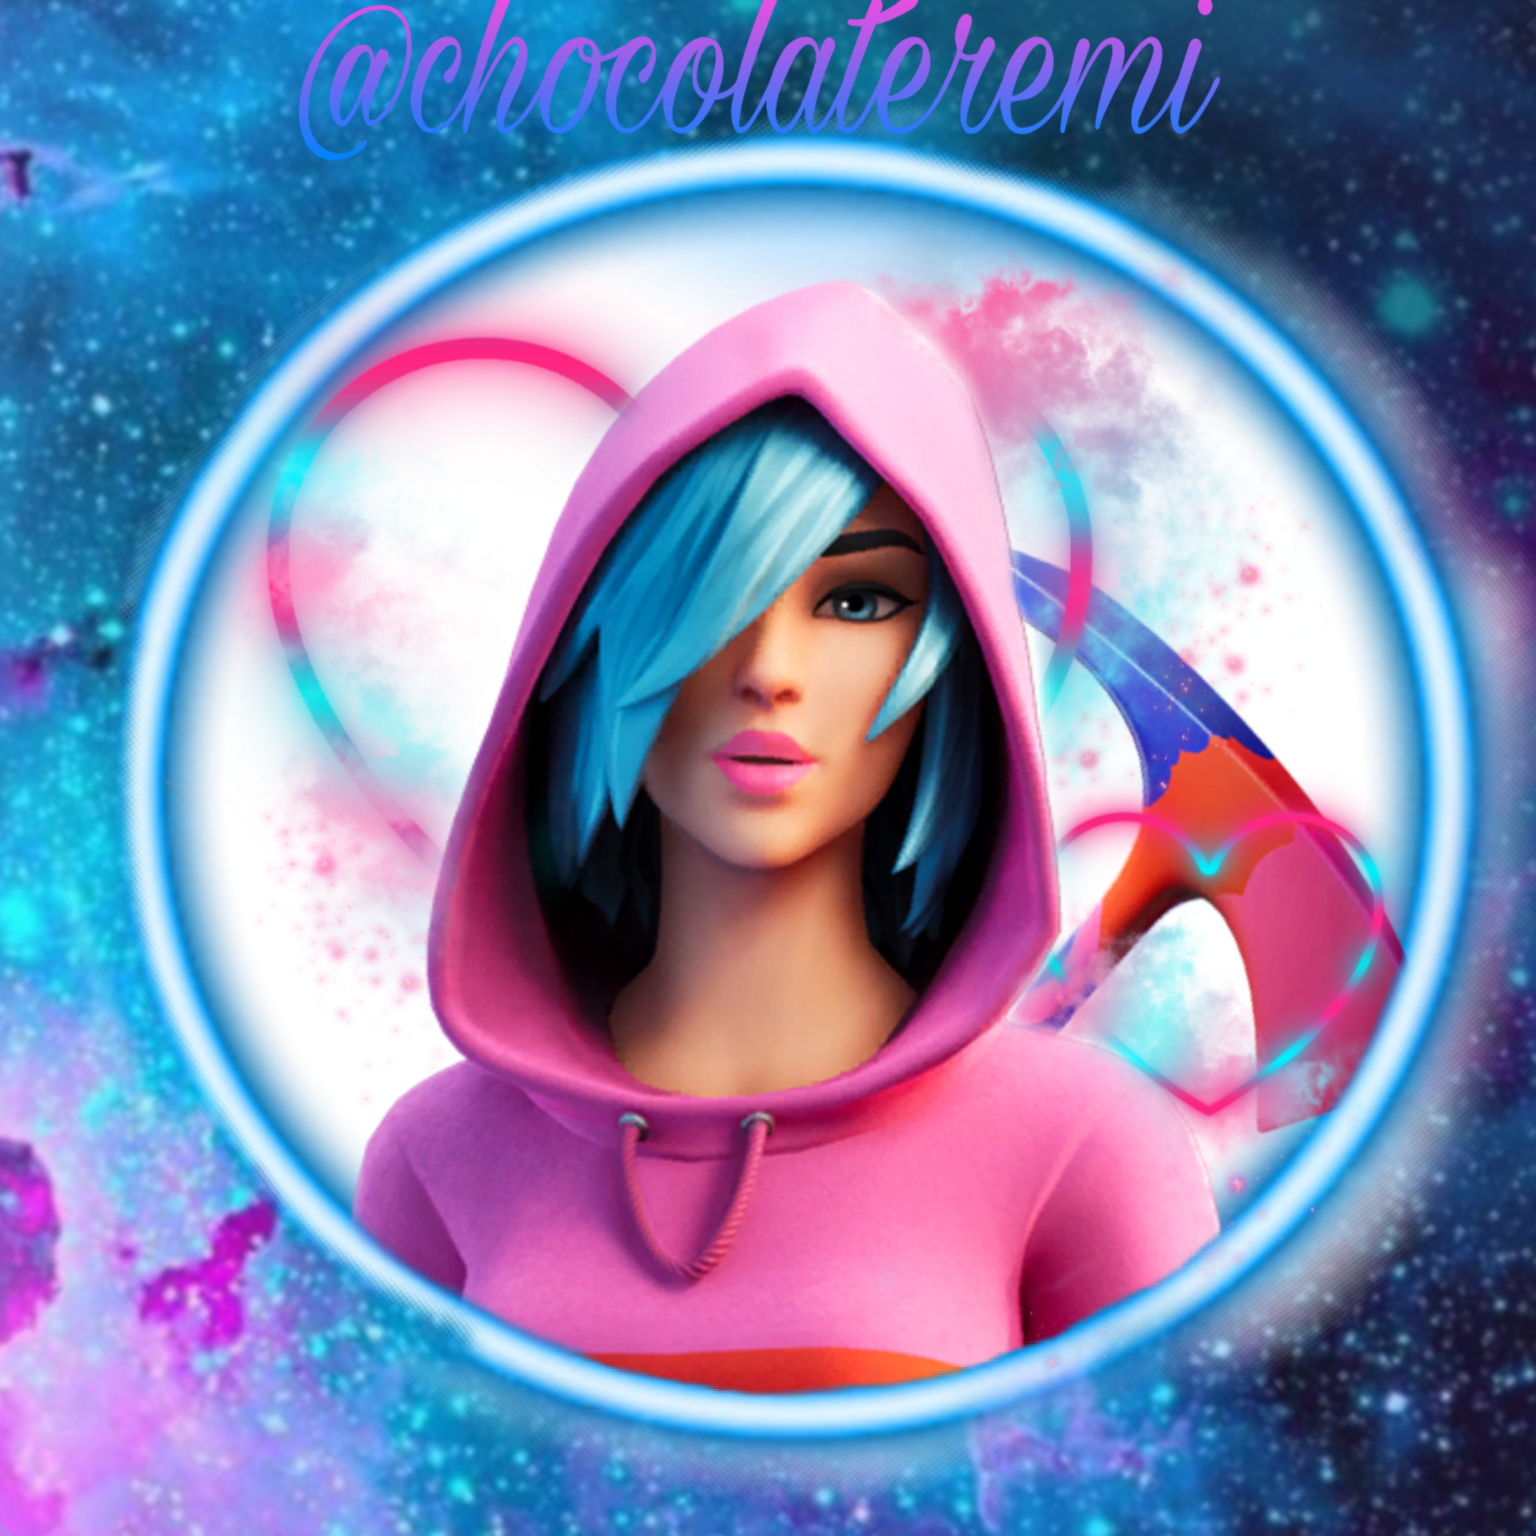 Toedit Fortnite Skins By Chocolateremi